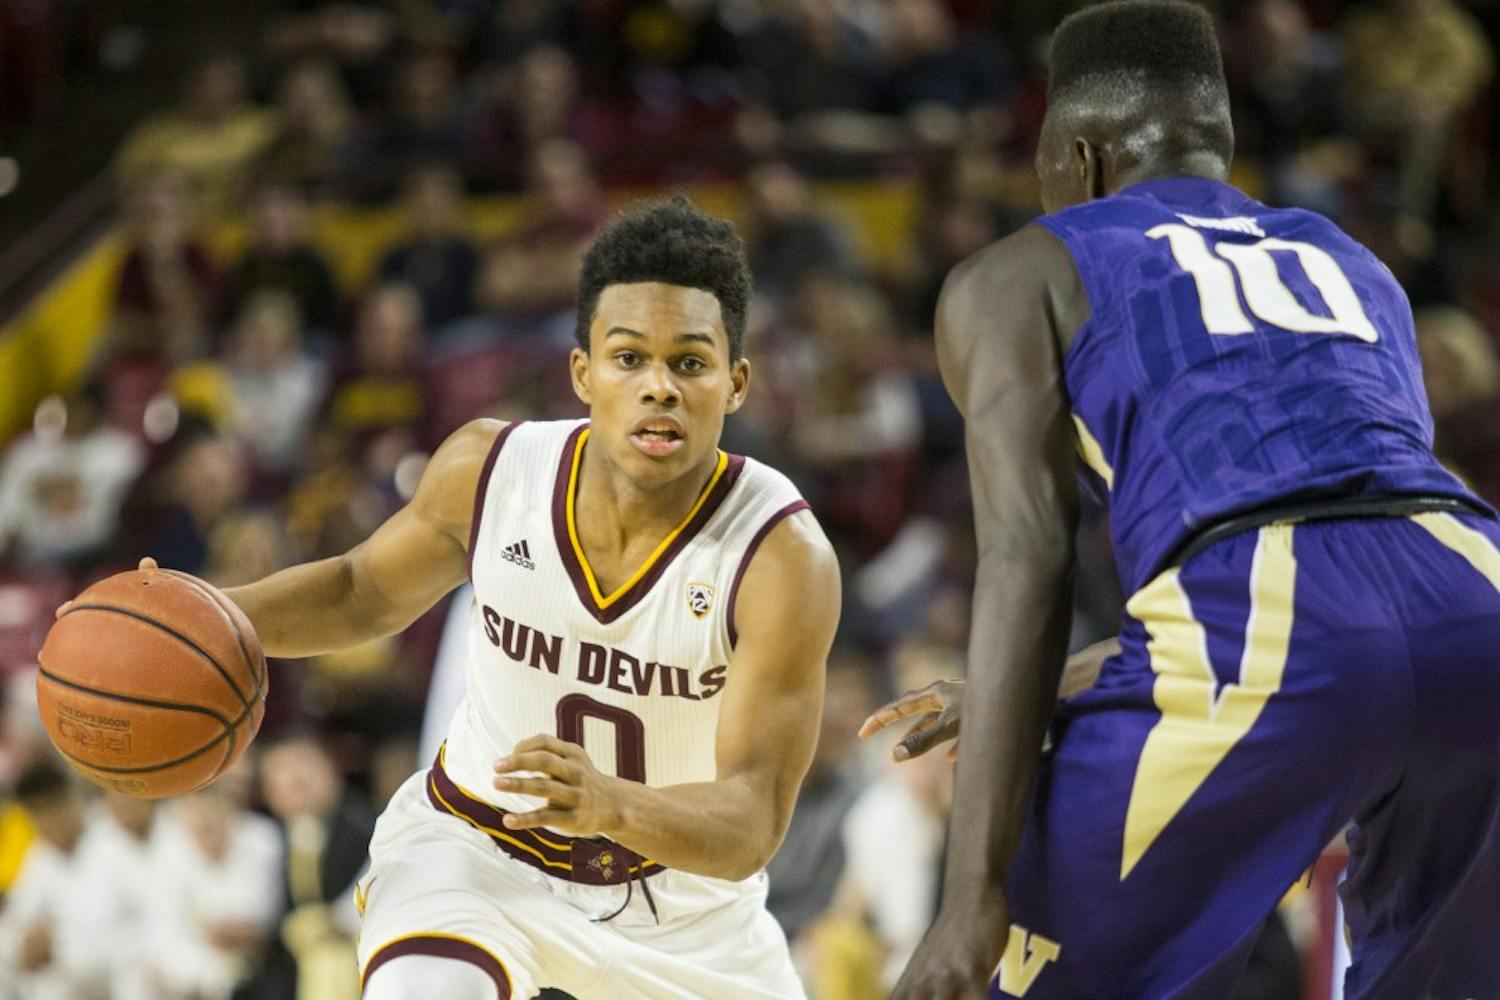 Arizona State Sun Devils guard Tra Holder (0) looks for an opening in the Husky defense during a game against the University of Washington Huskies in Wells Fargo Arena on Saturday, Jan. 16, 2015, in Tempe, Ariz. The Huskies won the matchup, 89-85.